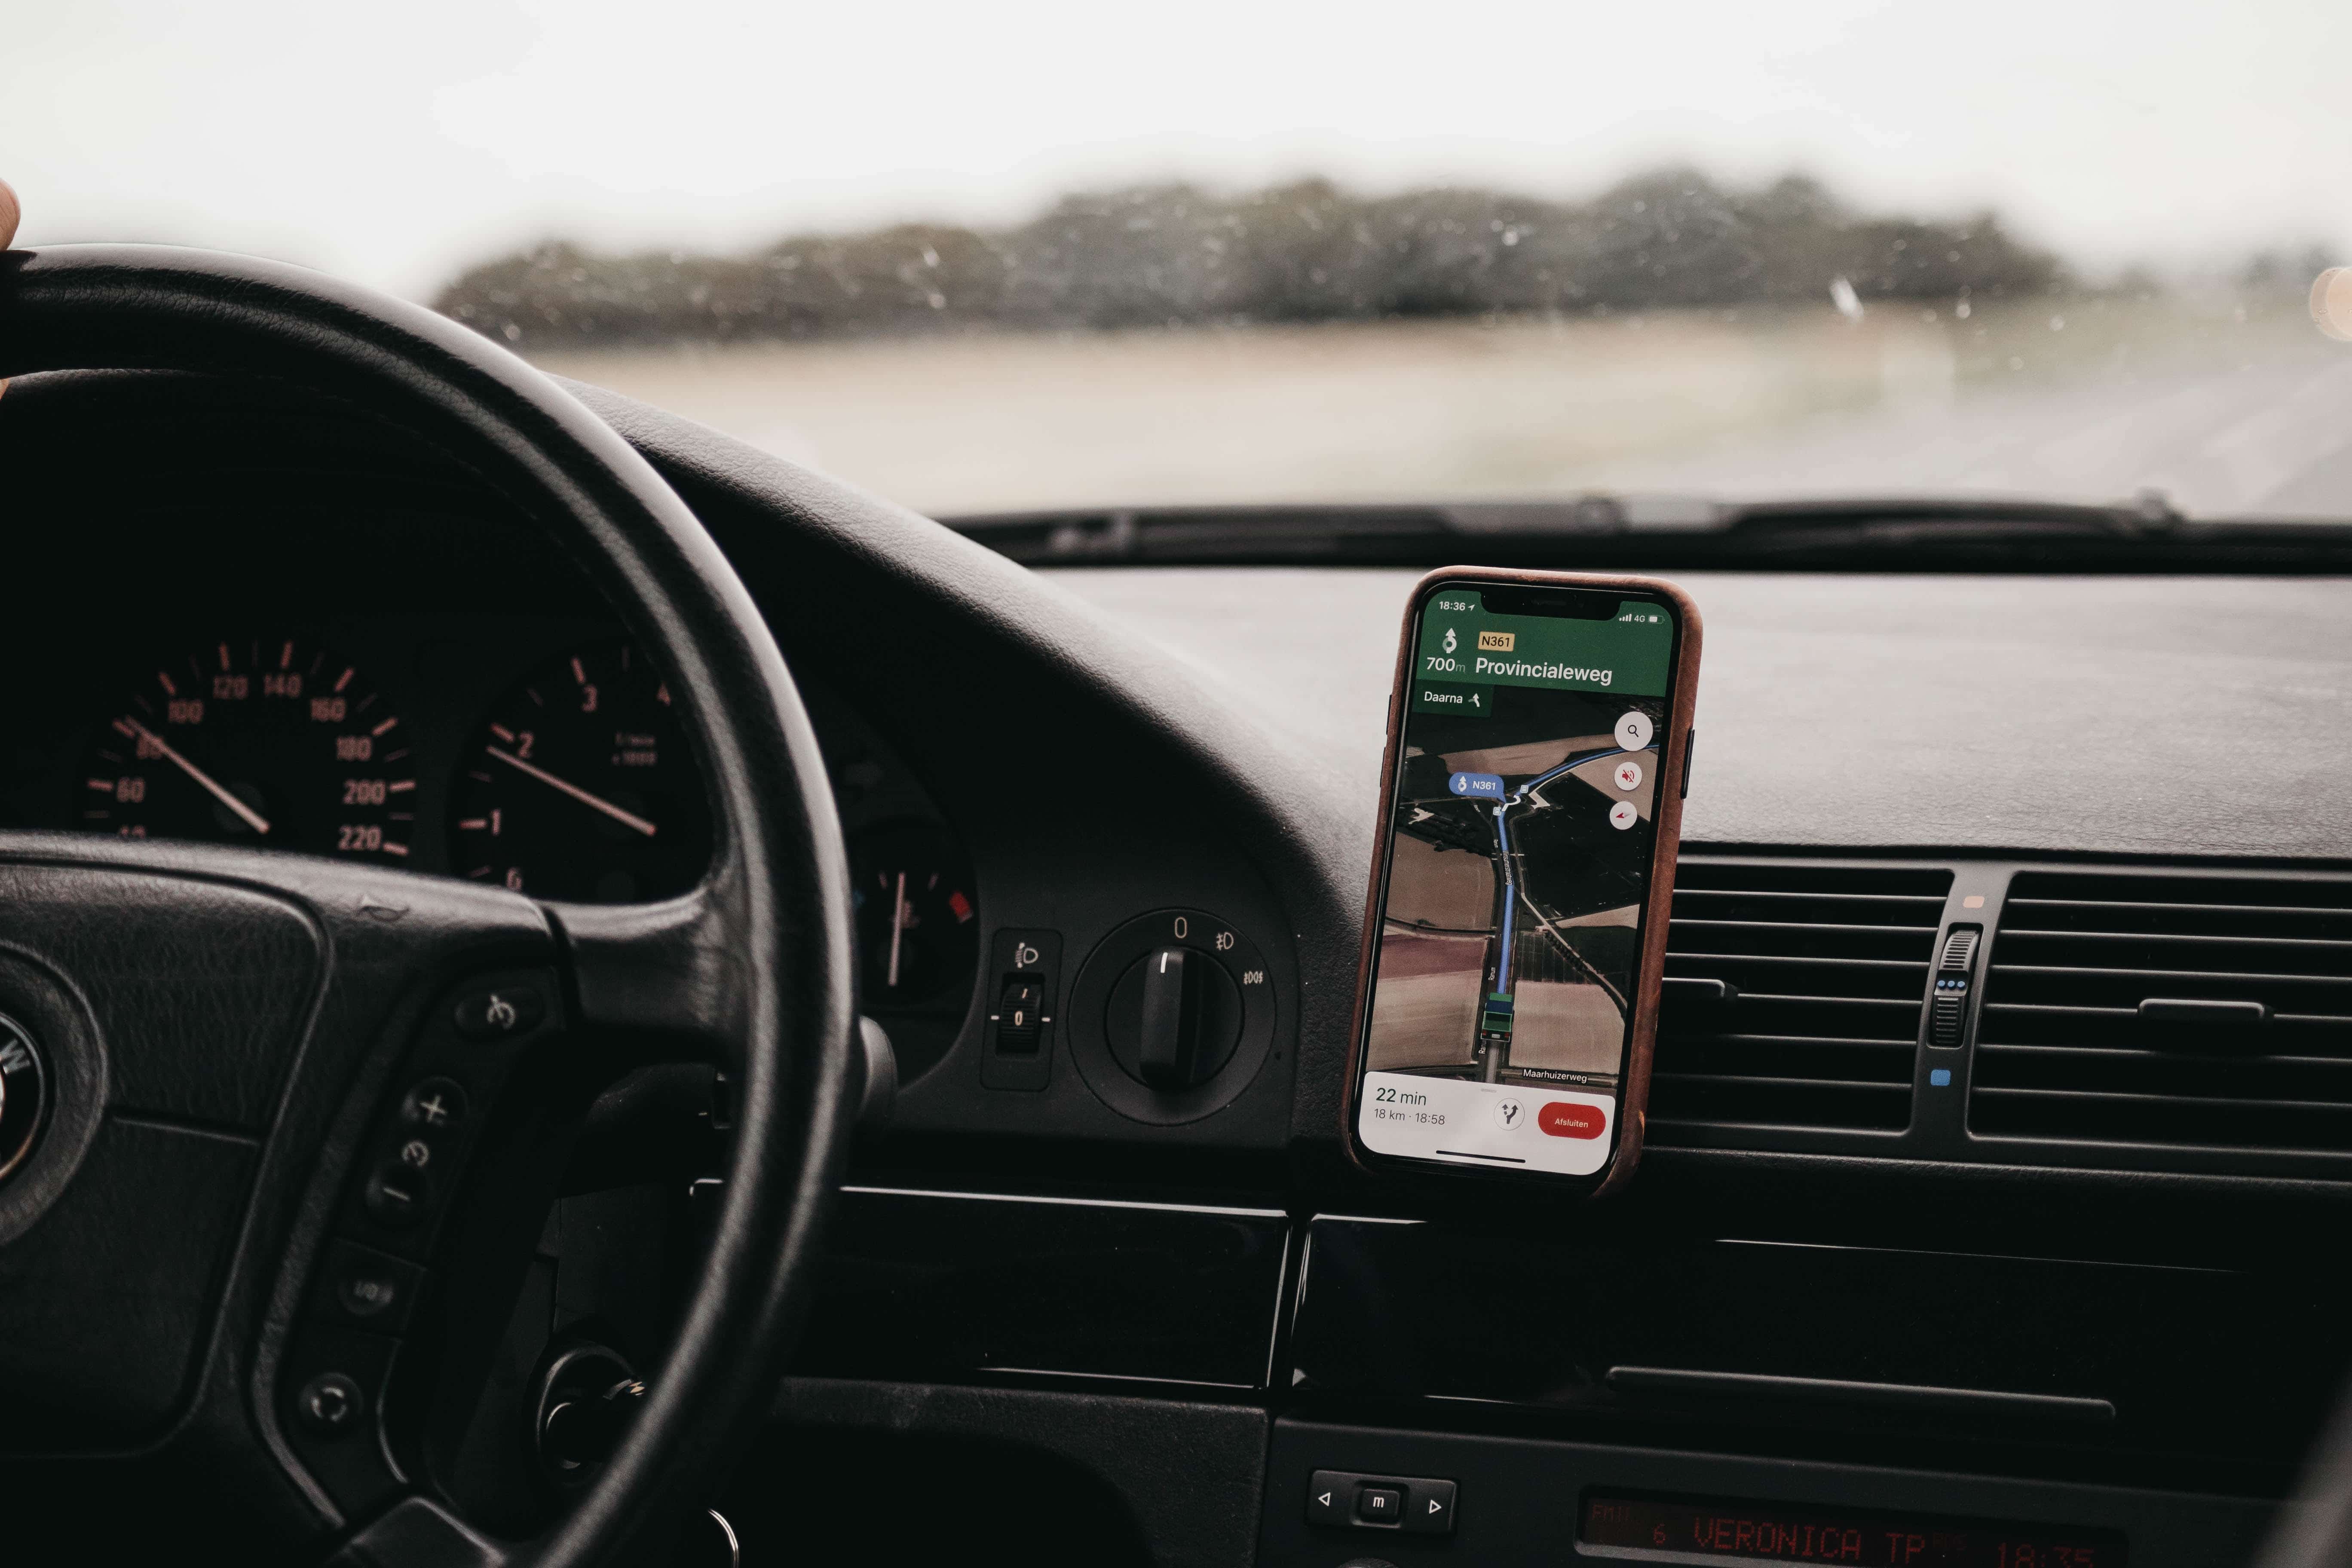 google maps on phone in car